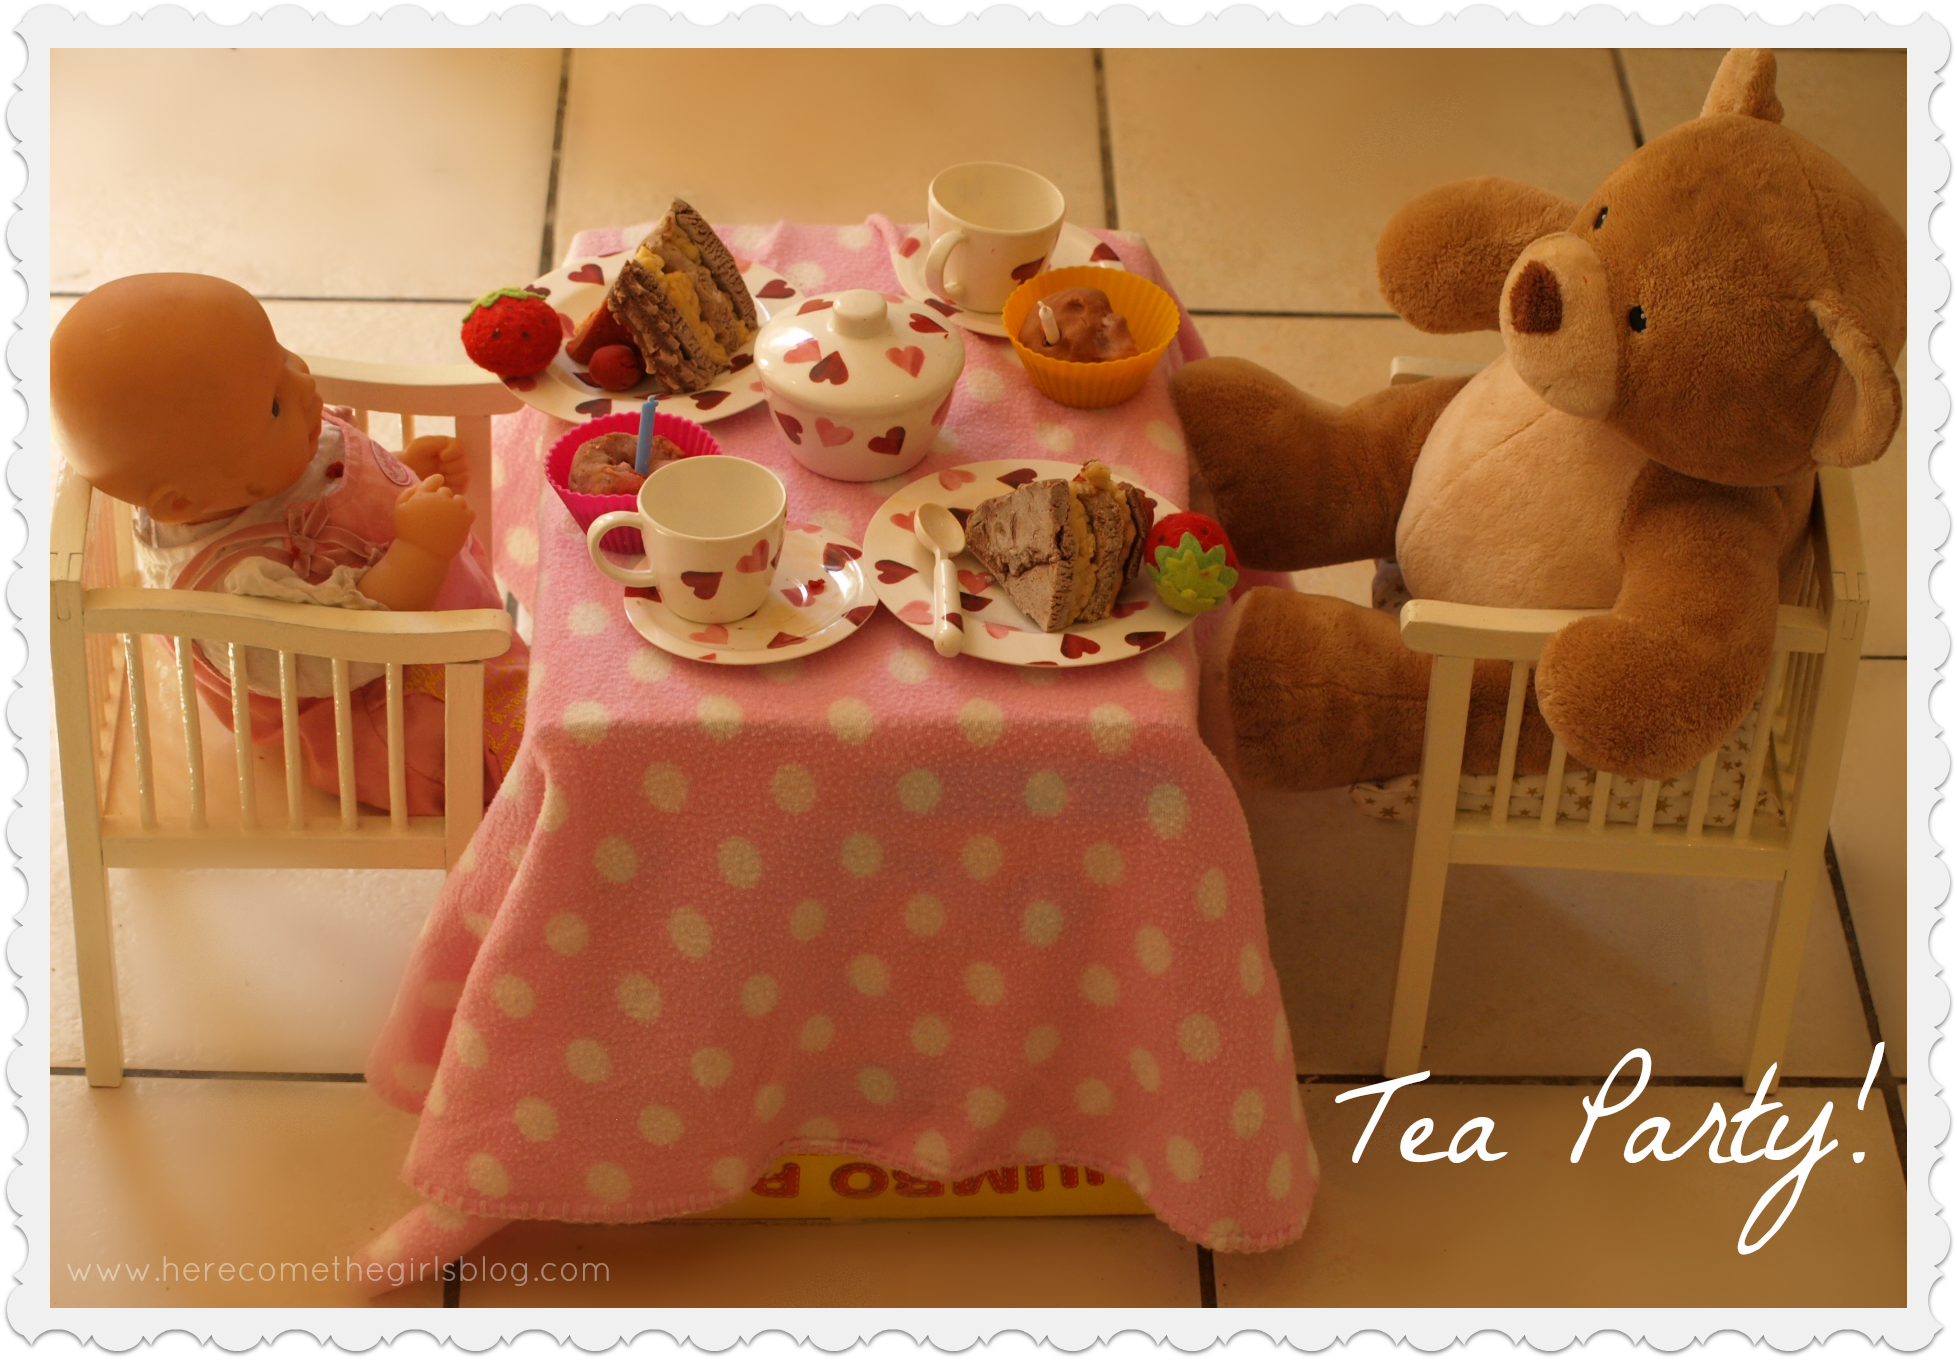 Teddy bear tea party - Here Come the Girls